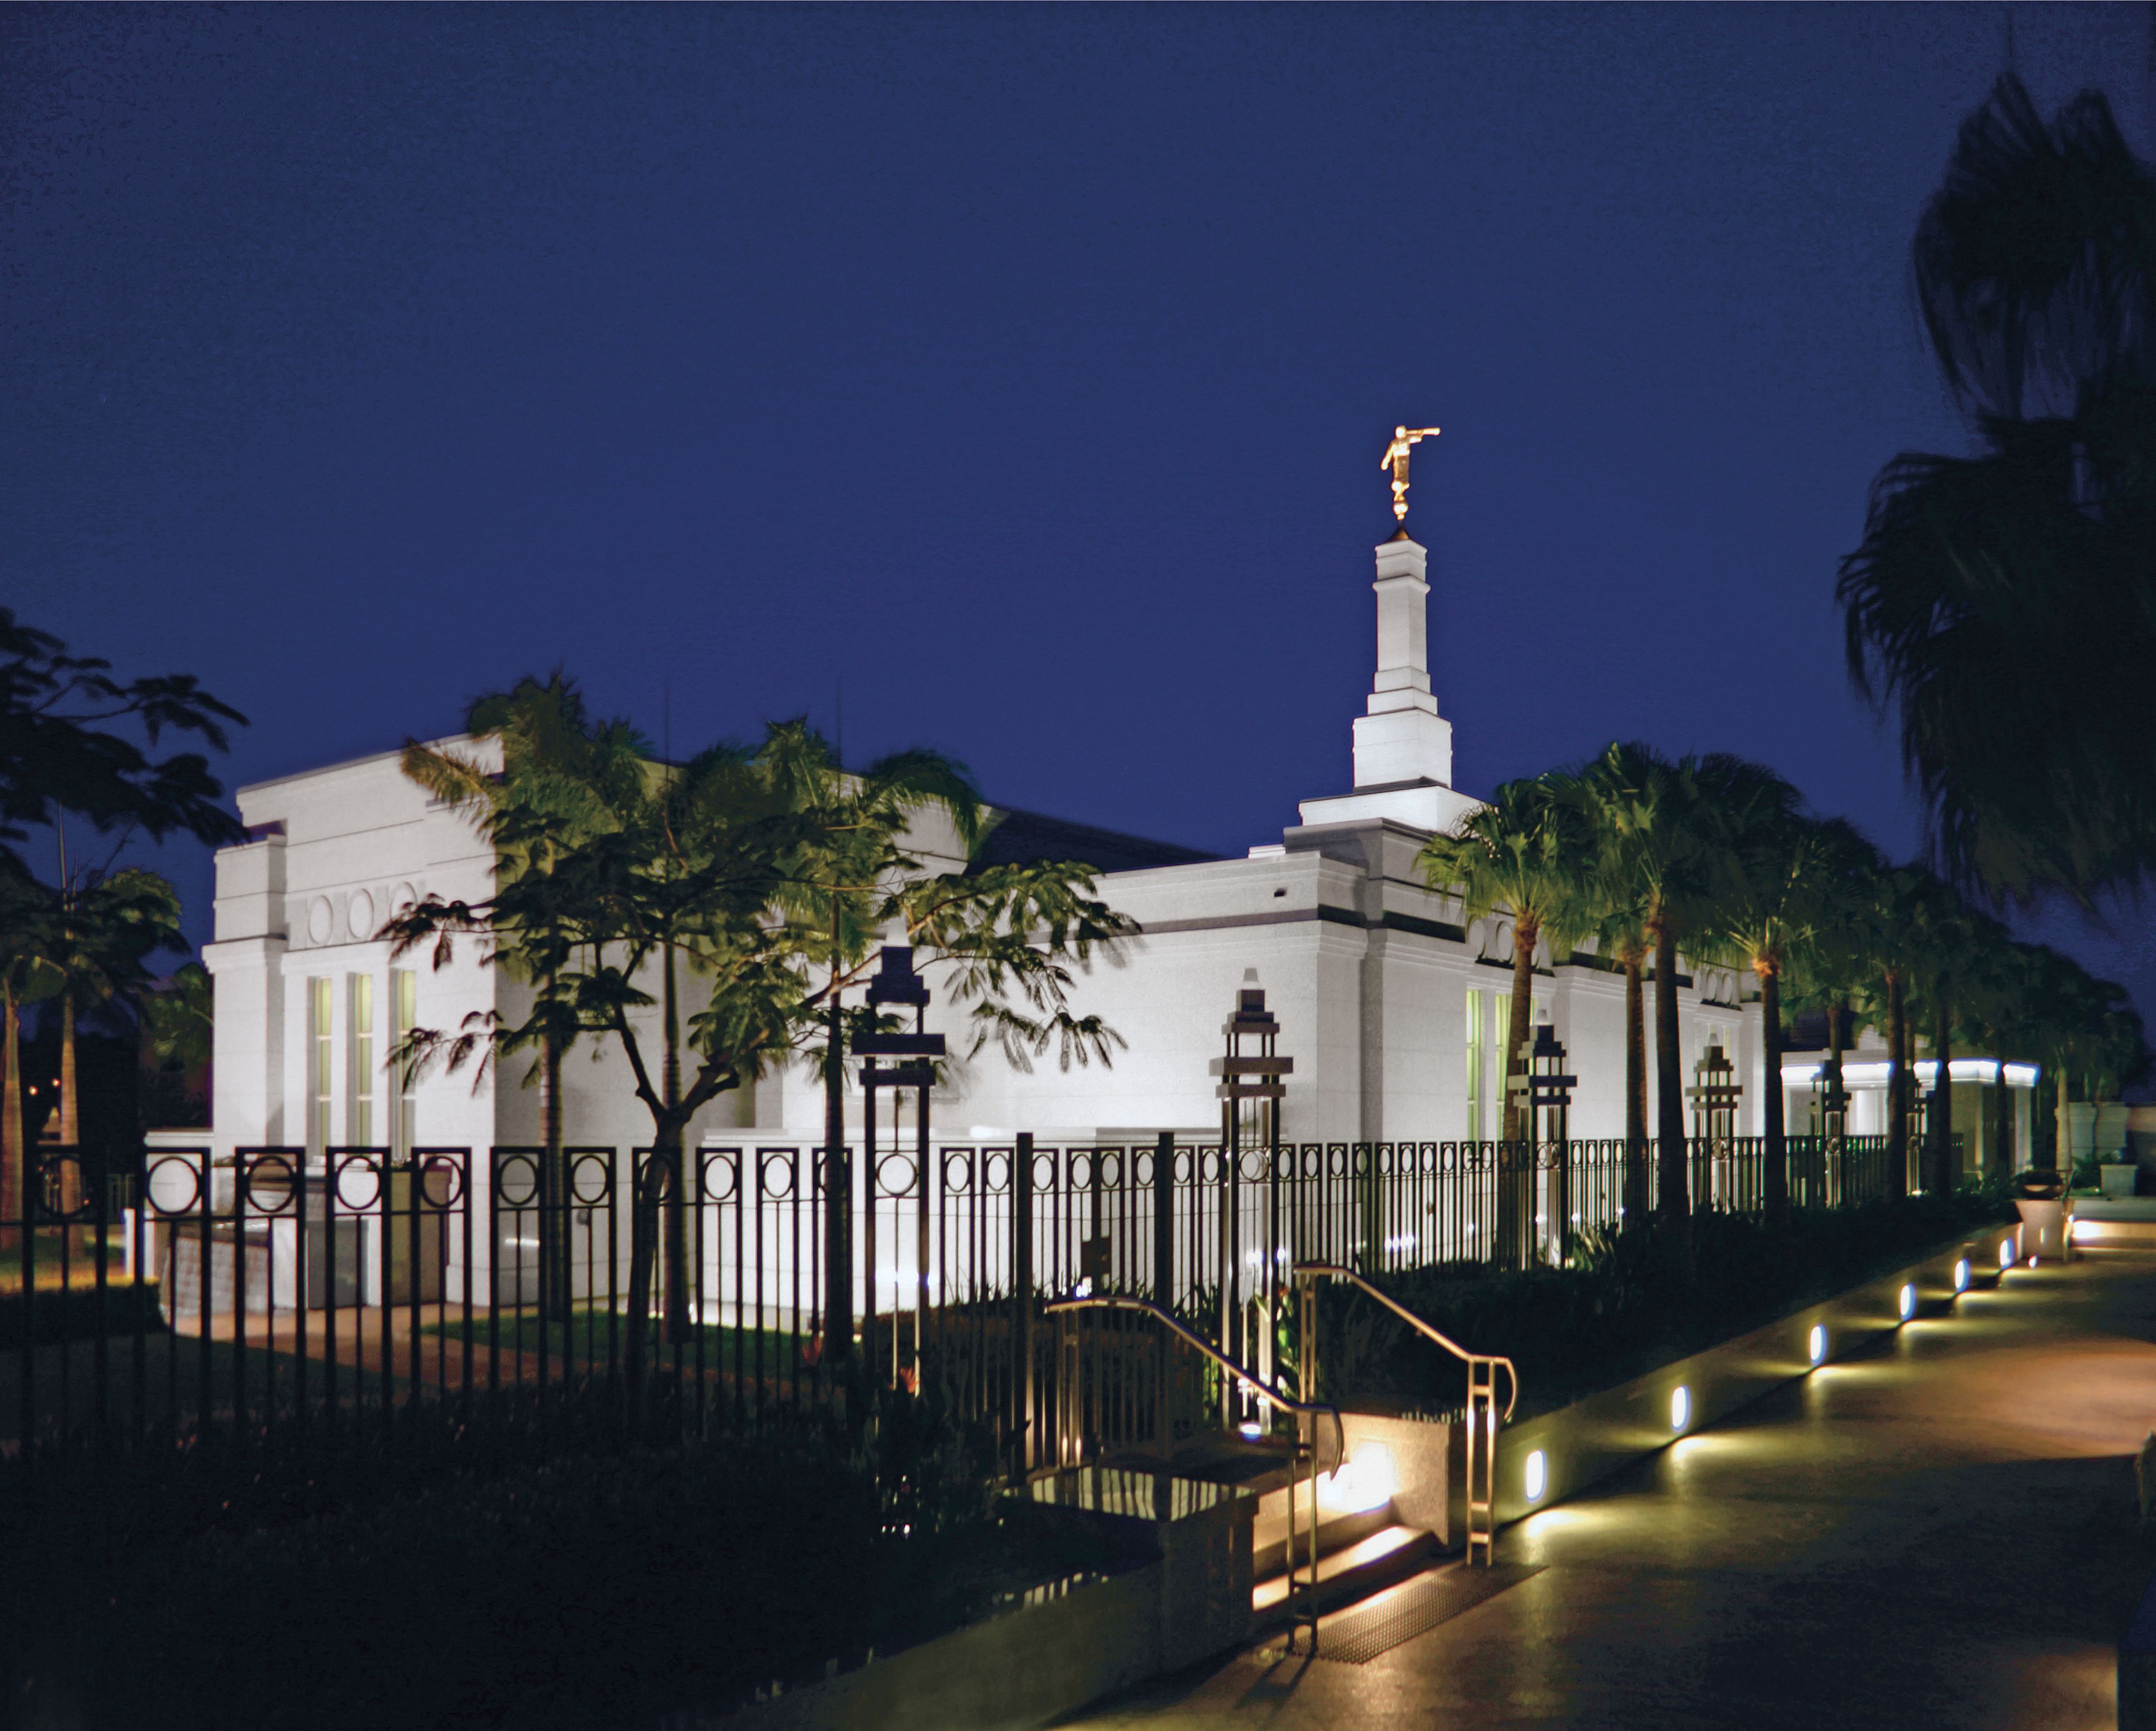 The Brisbane Australia Temple and grounds lit up at night.